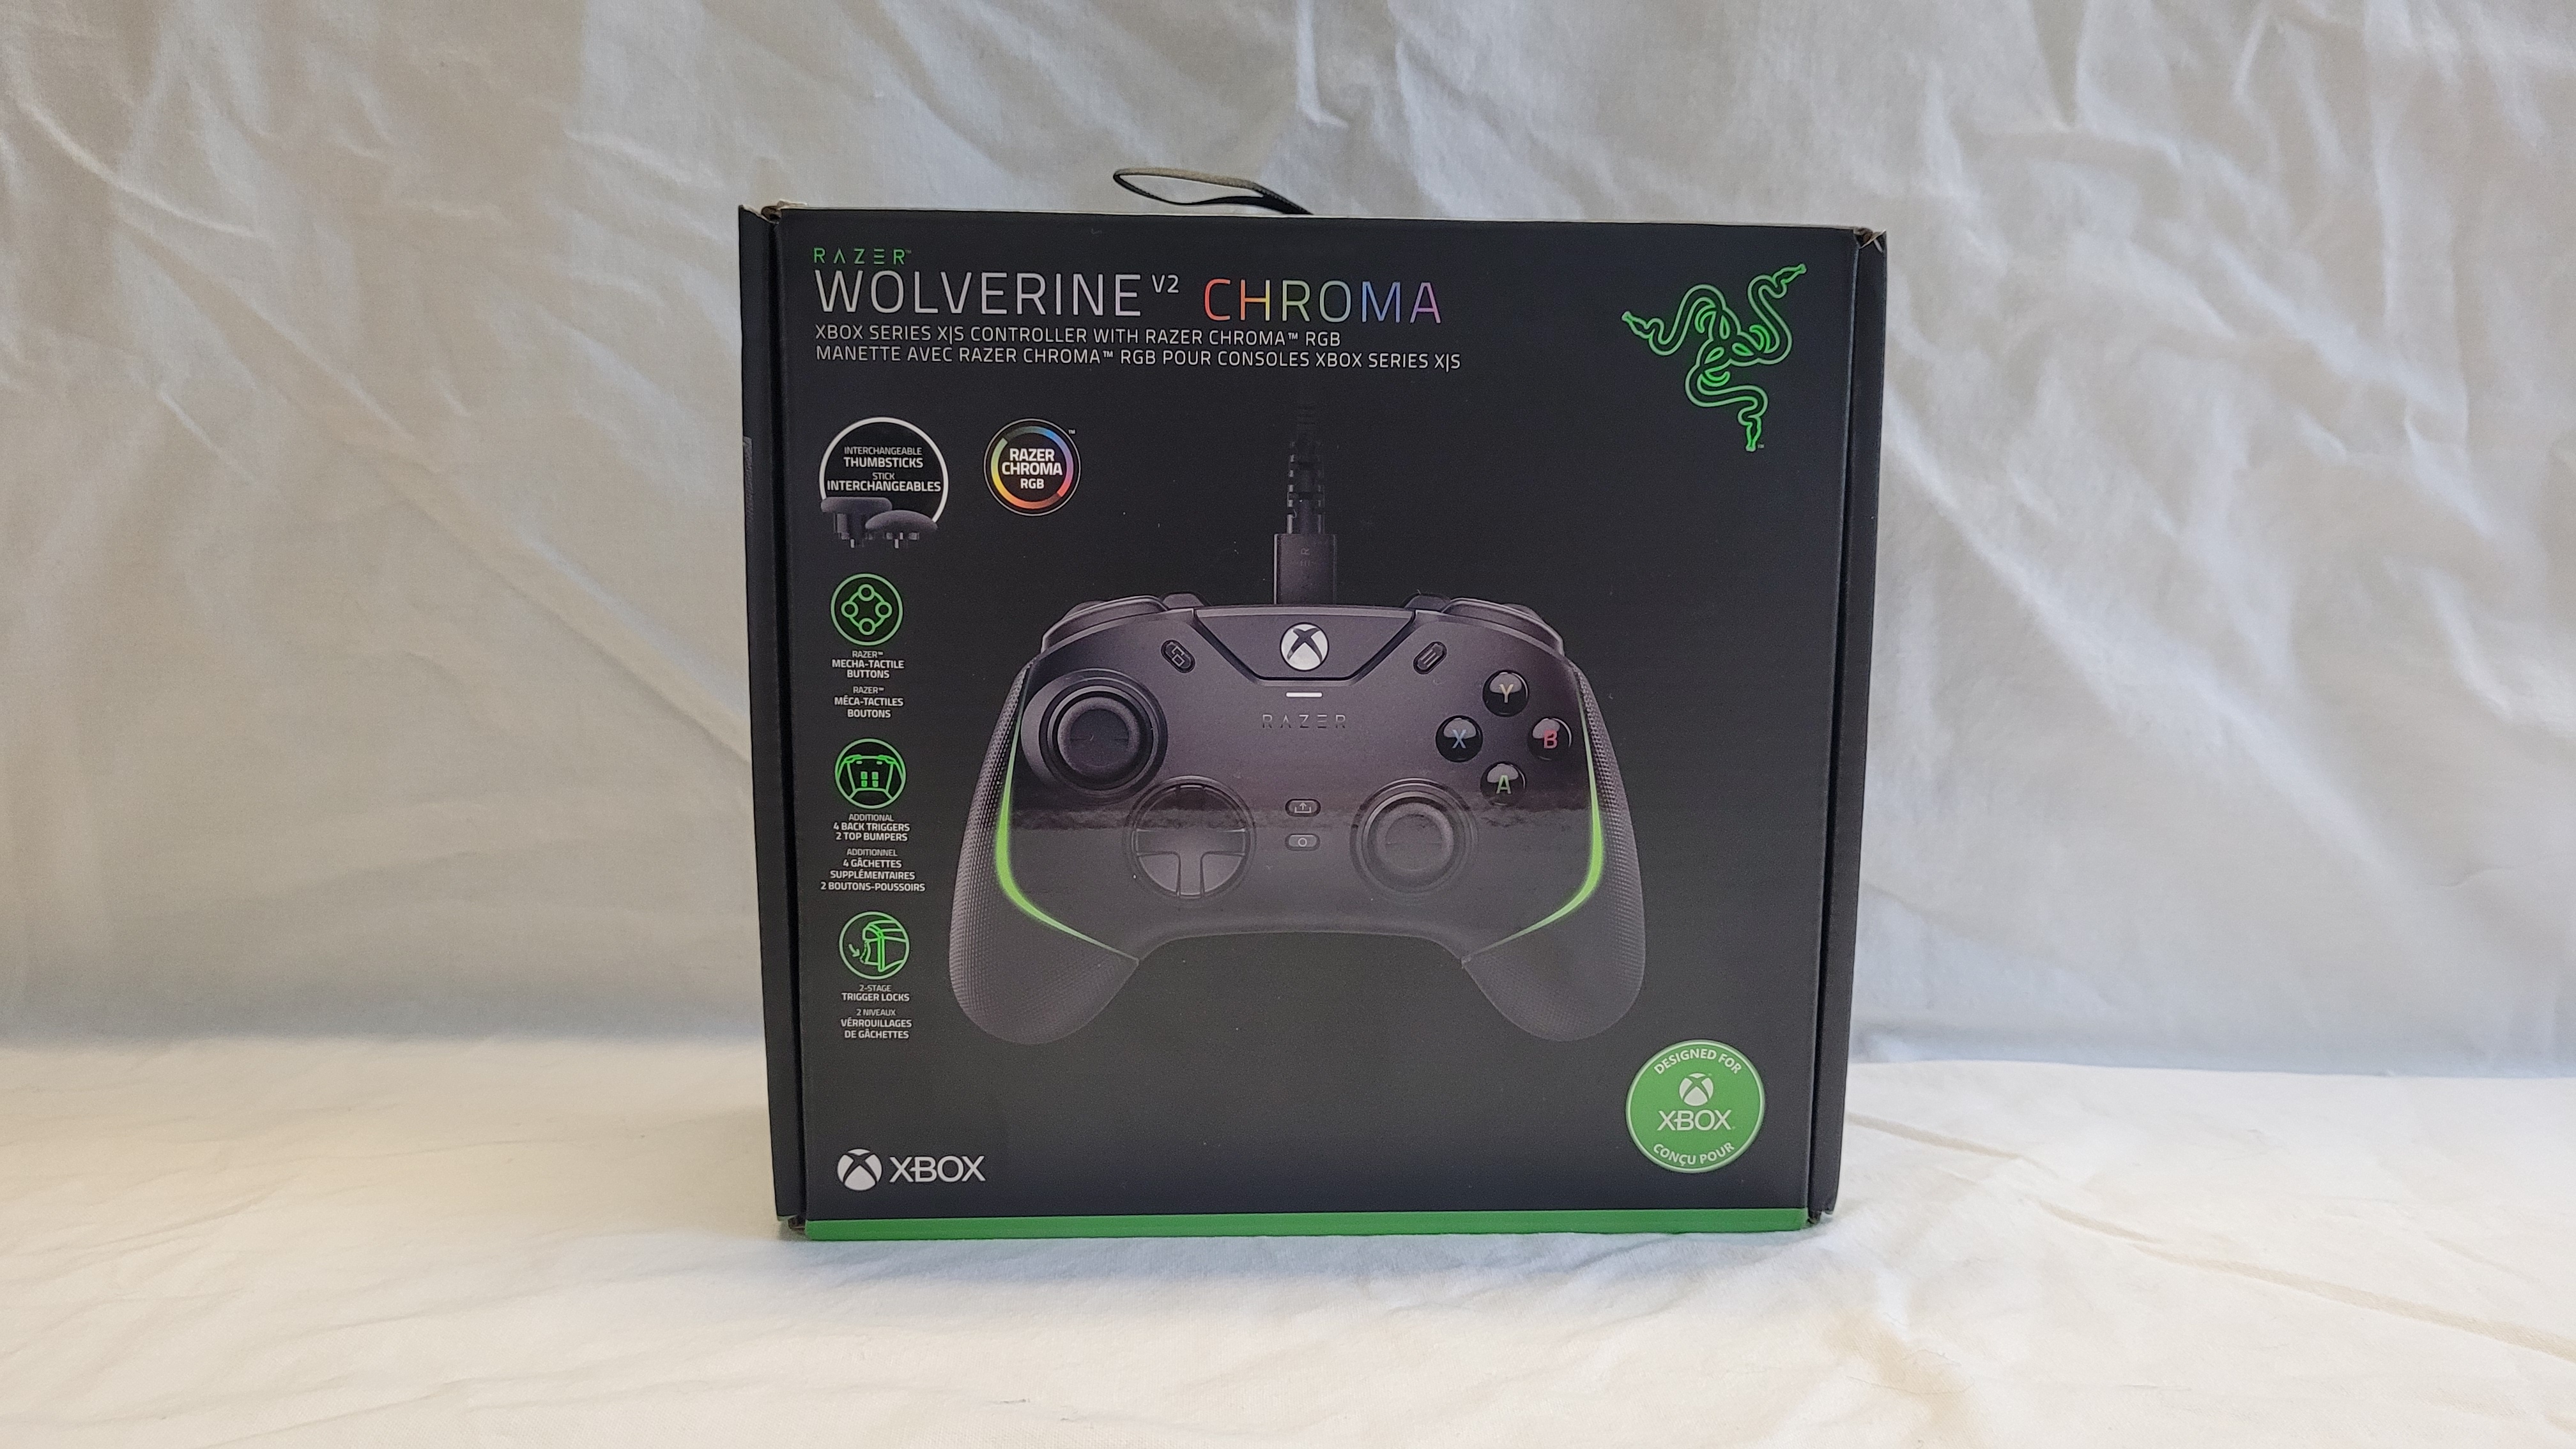 Razer Wolverine Chroma V2 Controller Series Contents Software Mecha-Tactile & Review TechPowerUp - Xbox X|S | Satisfaction Packaging, 